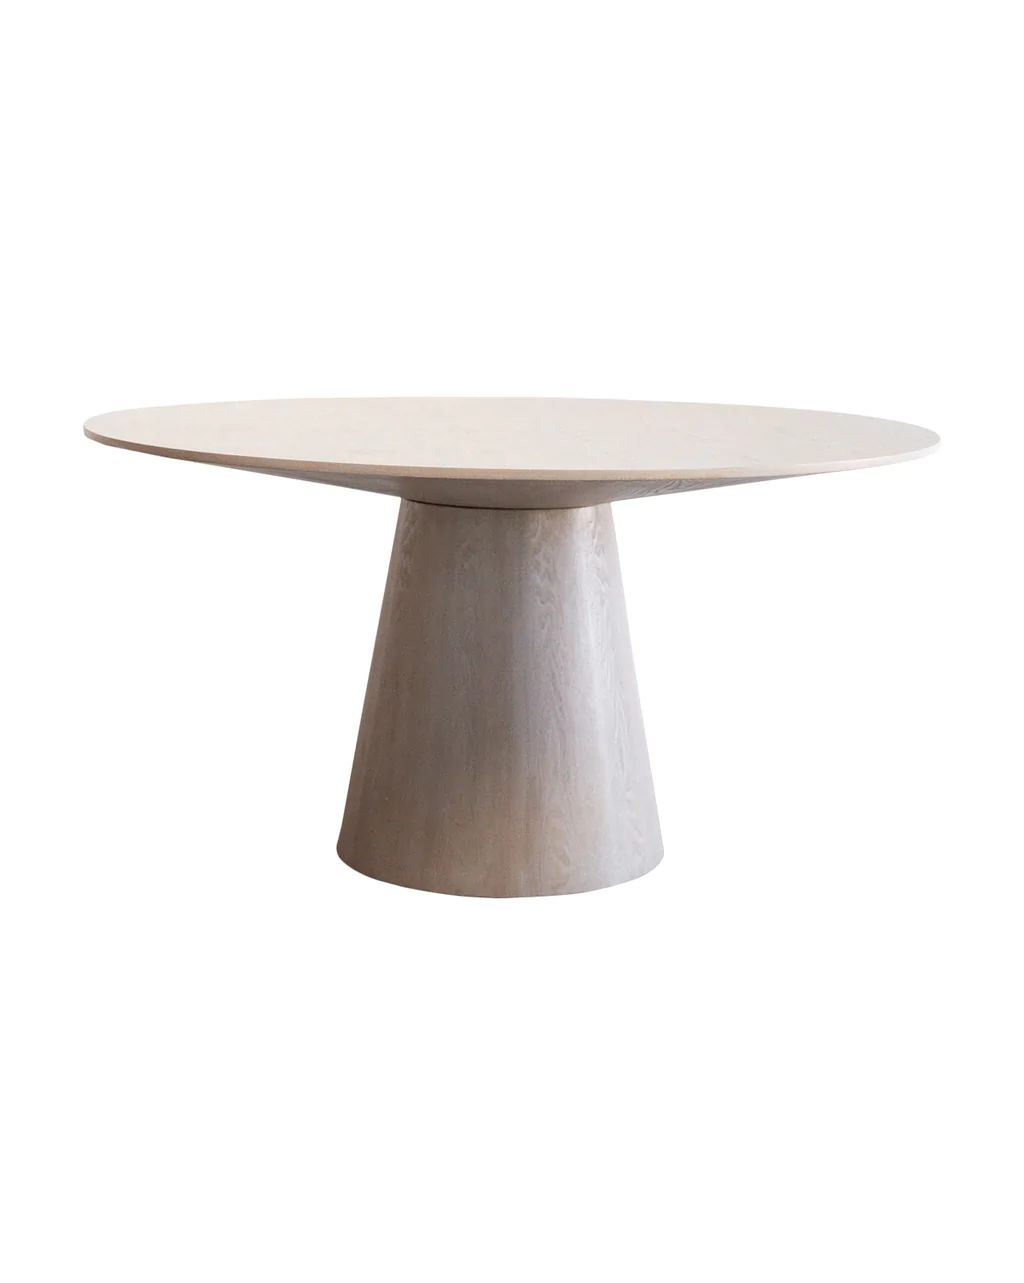 Preston Round Dining Table | McGee & Co.